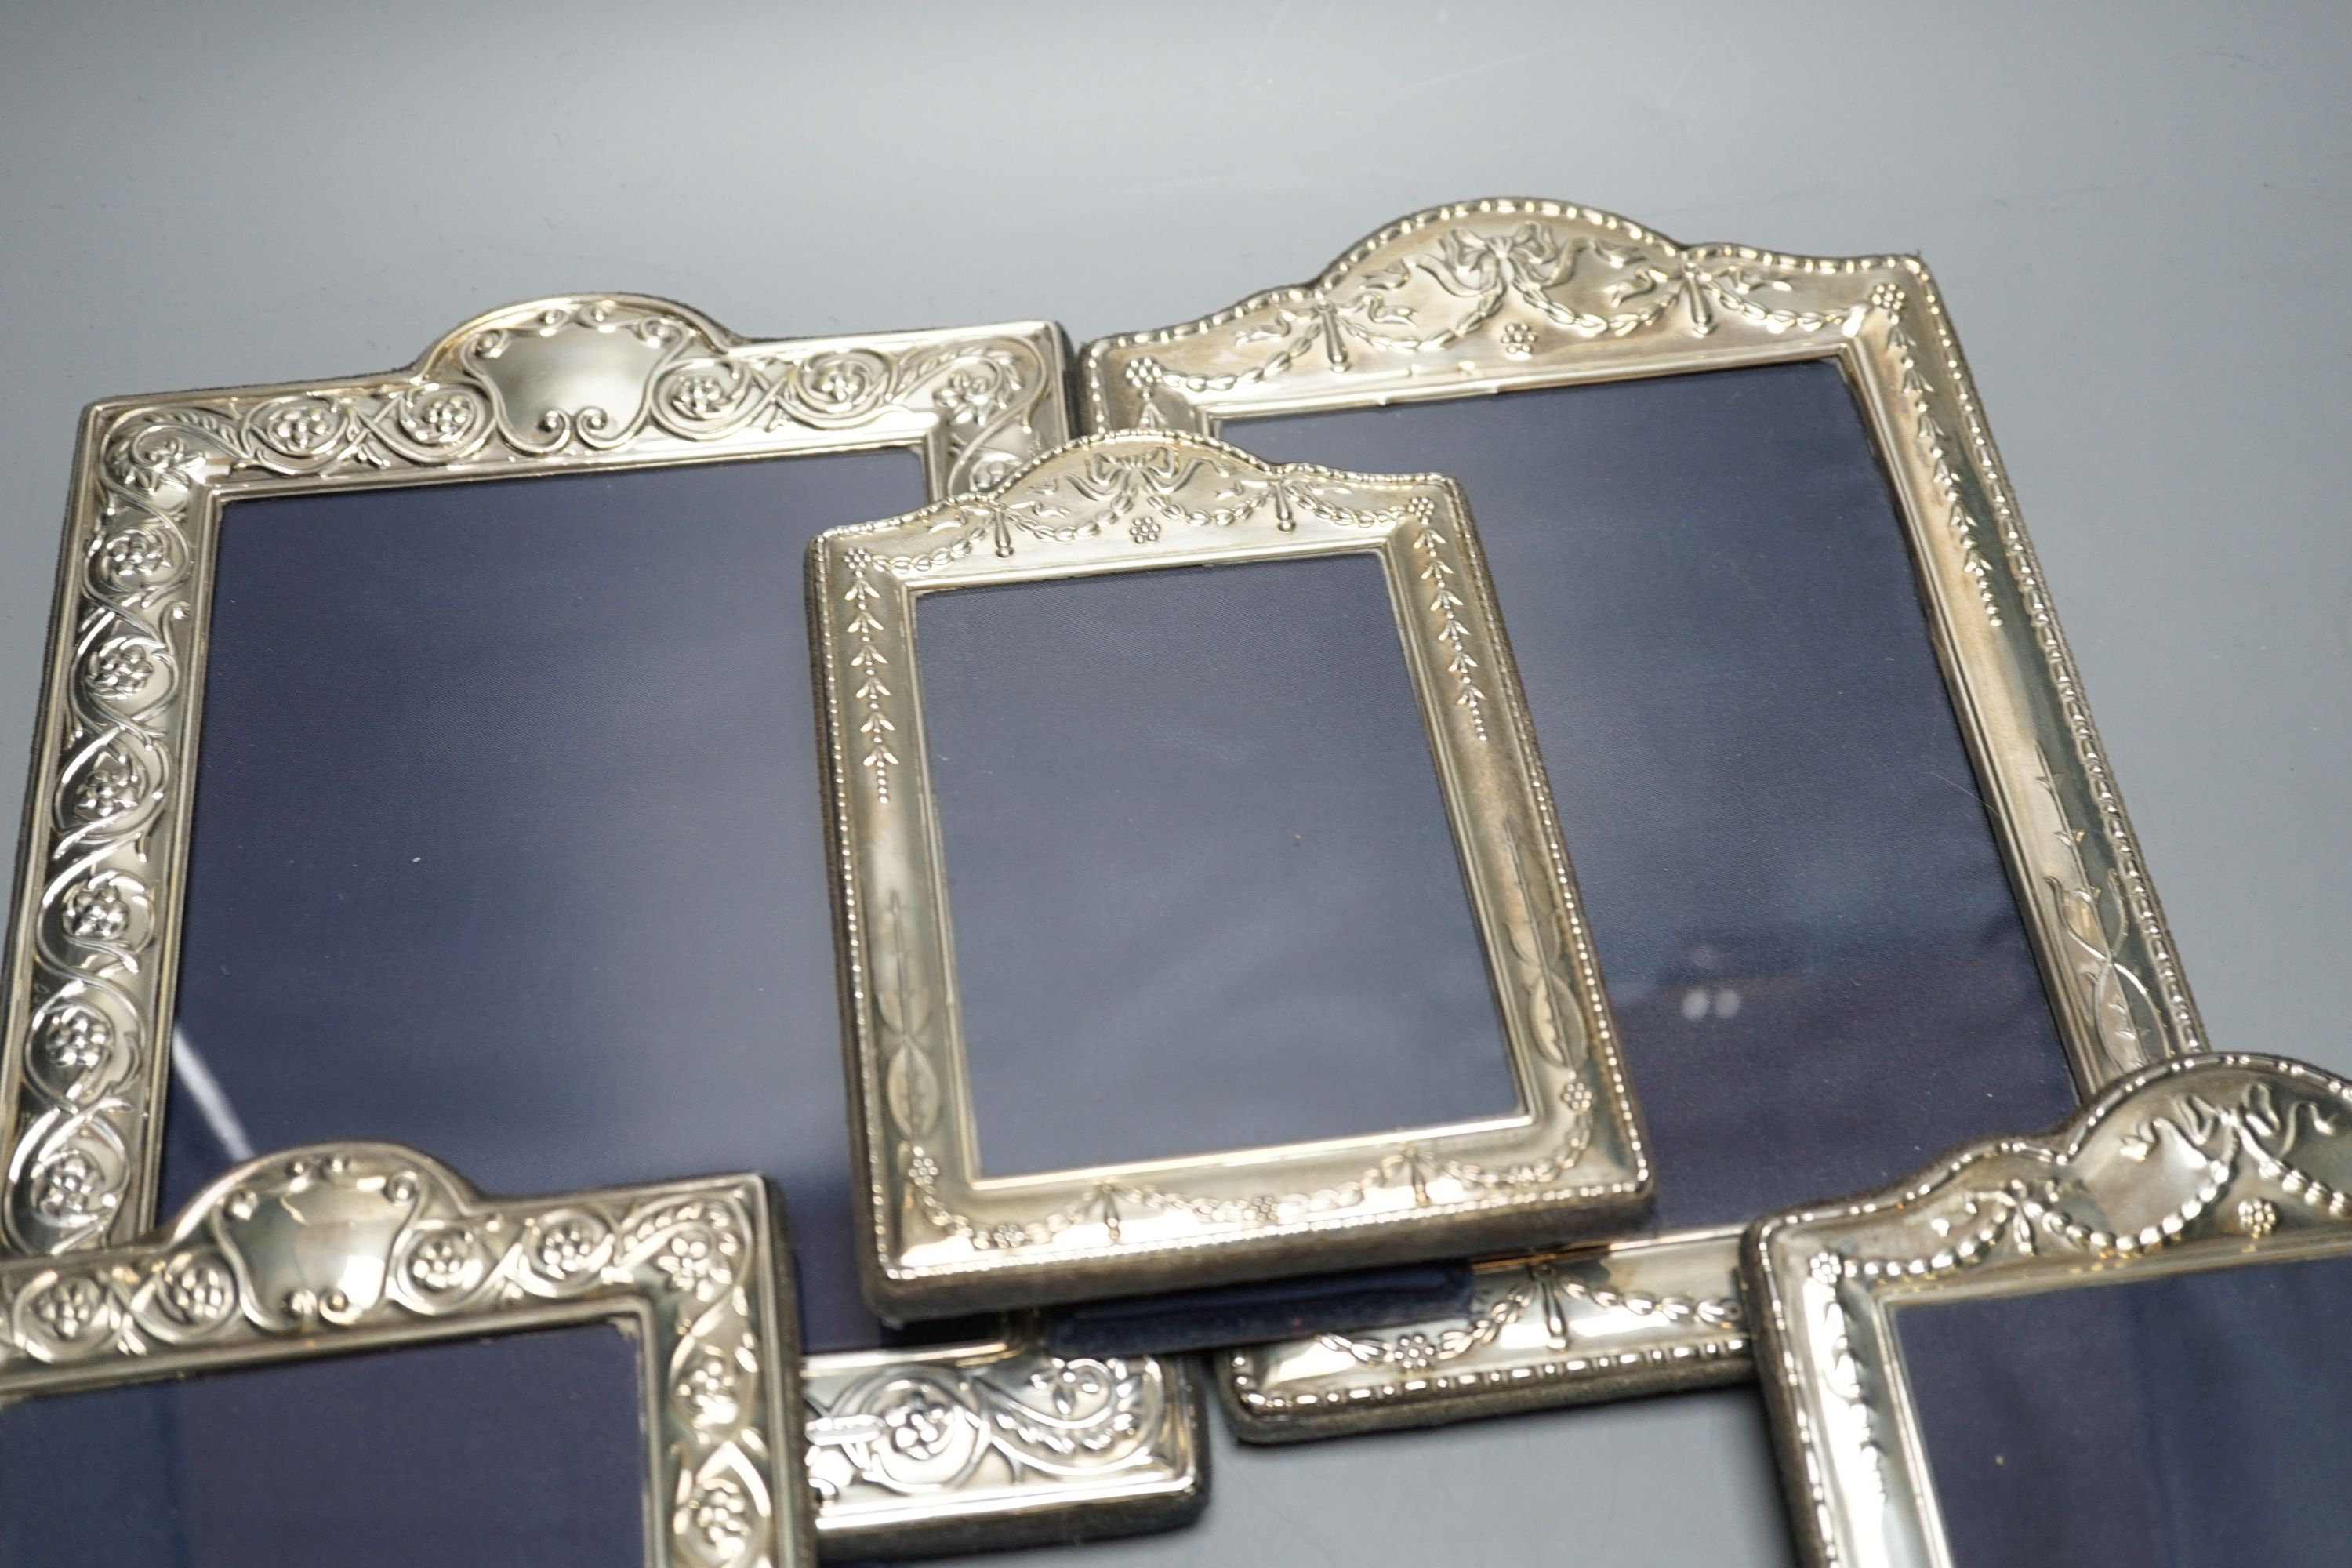 Two modern graduated pairs of decorated silver mounted photograph frames, Carrs of Sheffield, 2000 & 2001, largest 25.6cm and two smaller silver mounted frames.